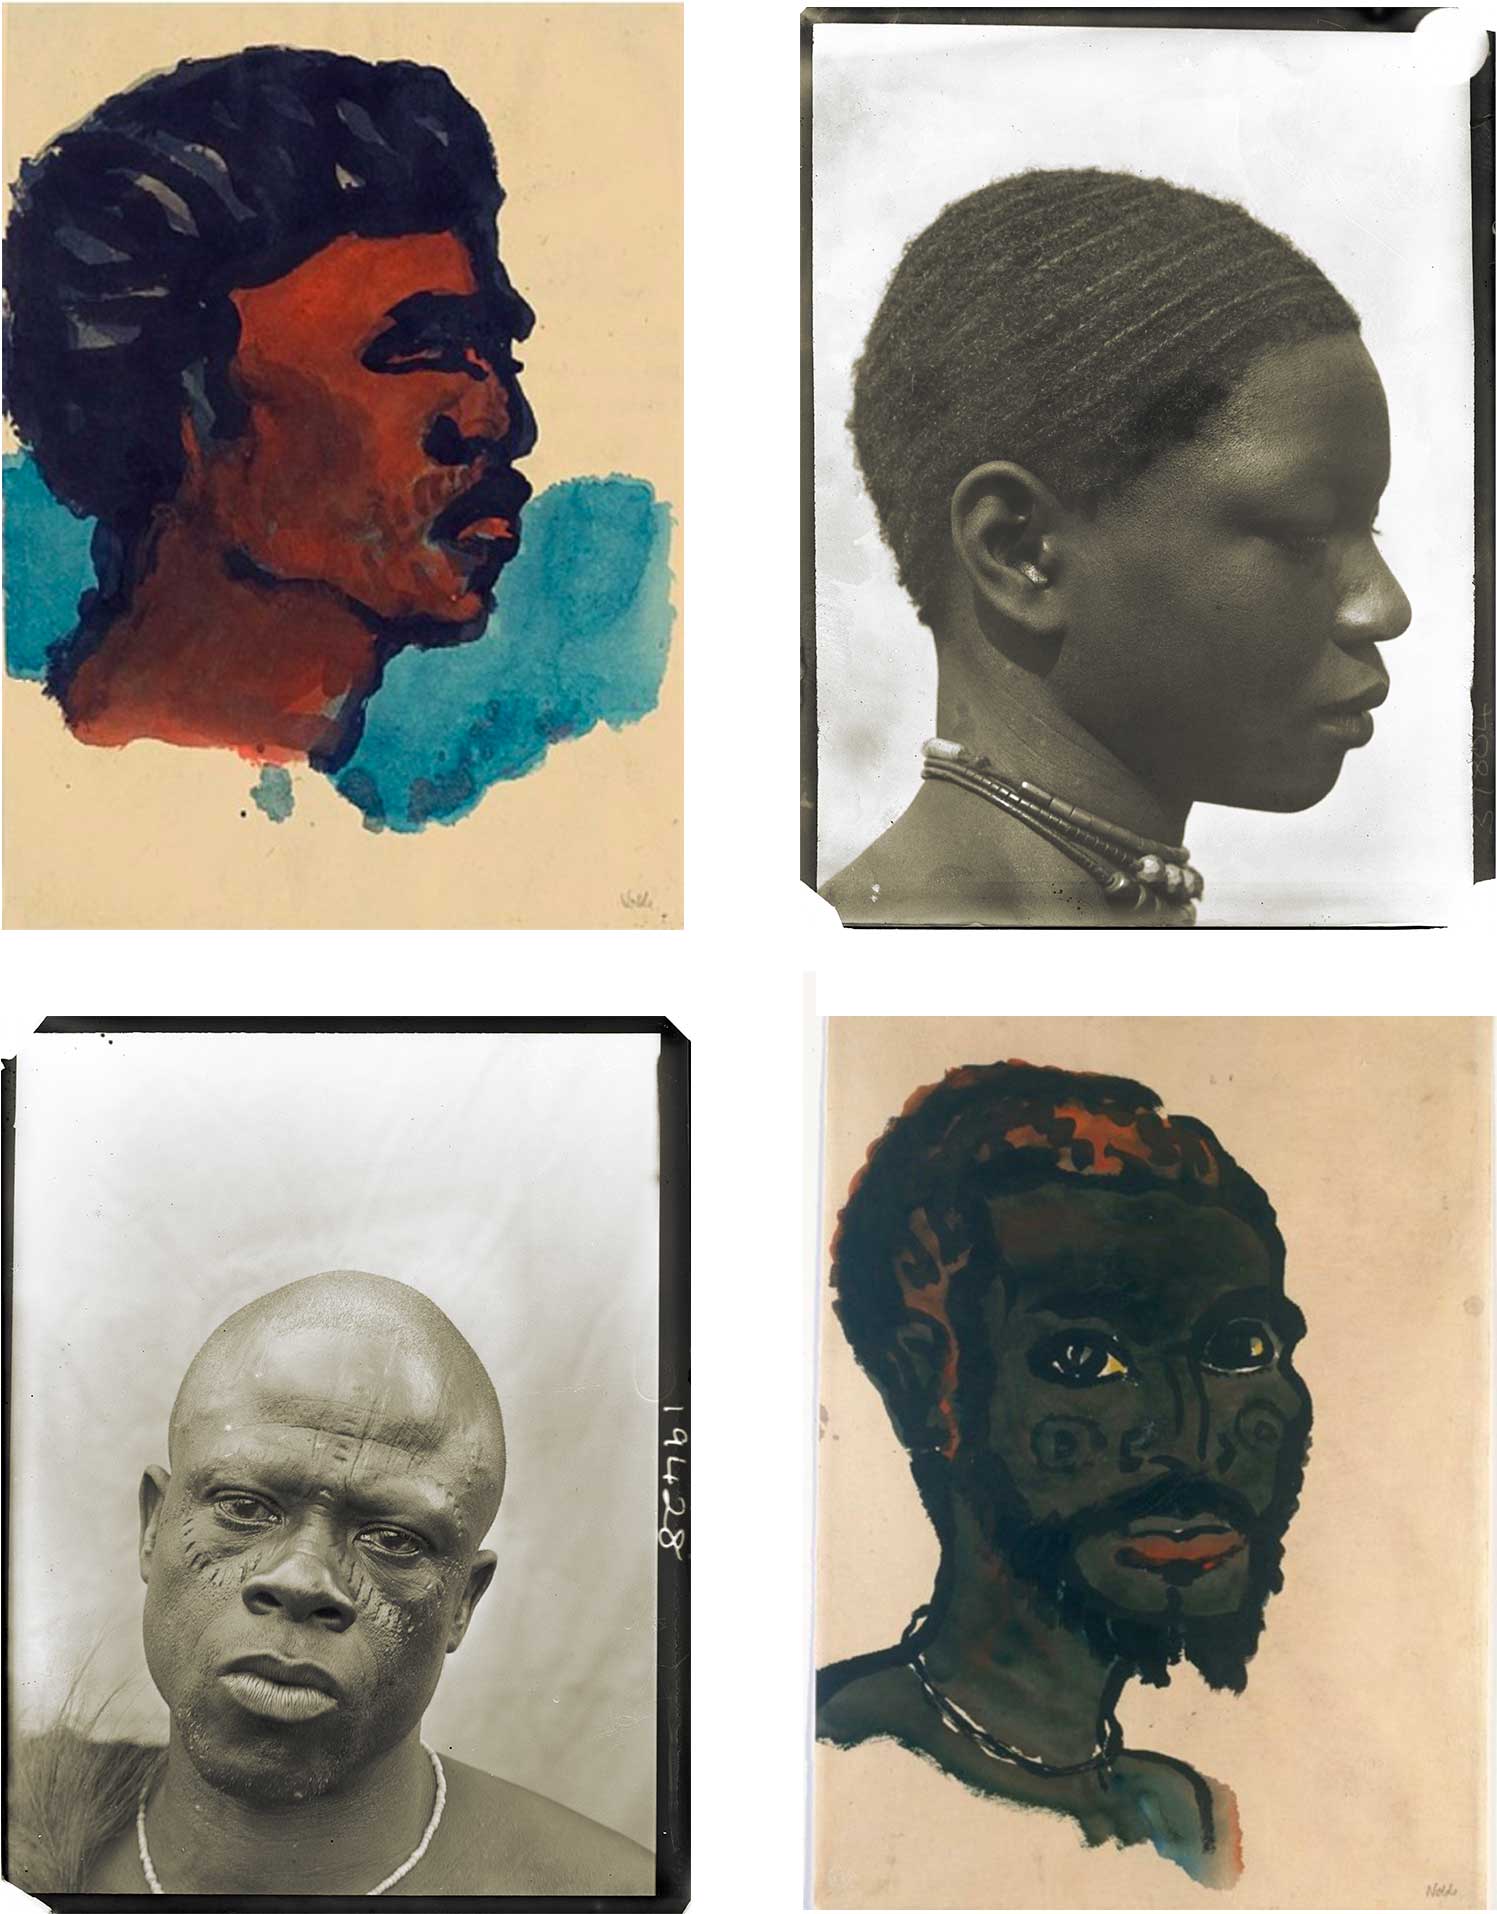 Juxtaposing Emil Nolde’s New Guinea watercolour portraits with Northcote Thomas’ physical type photographs. Clockwise from top left: Emil Nolde, Bildnis eines Südsee-Insulaner im Profil nach Rechts, 1914, watercolor and ink on paper, 48.8 x 36 cm, ©Nolde Stiftung Seebüll; Northcote Thomas, unnamed woman, Okpella, present-day Edo State, Nigeria, 1910, ©Royal Anthropological Institute, London, Inv.-Nr. 400_037804; Emil Nolde, Kopf eines Eingeborenen von vorn, 1913–14, ©Nolde Stiftung Seebüll; Northcote Thomas, unnamed chief, Oboluku, present-day Delta State, Nigeria, 1912, ©Royal Anthropological Institute, London, Inv.-Nr. 400_019428.